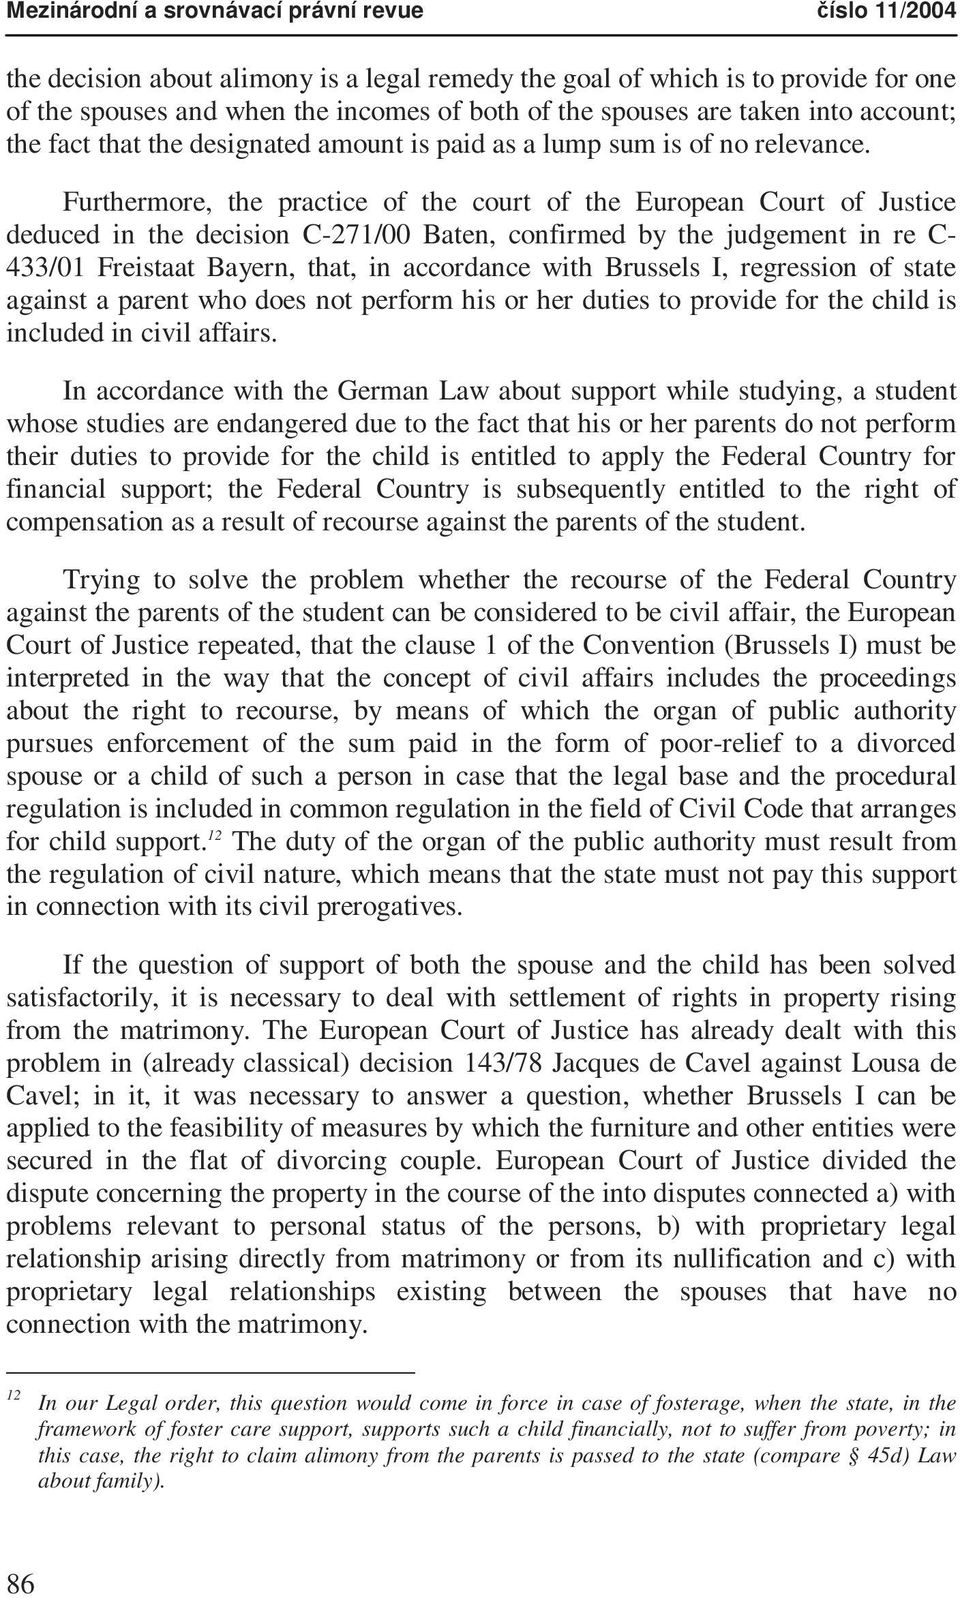 Furthermore, the practice of the court of the European Court of Justice deduced in the decision C-271/00 Baten, confirmed by the judgement in re C- 433/01 Freistaat Bayern, that, in accordance with